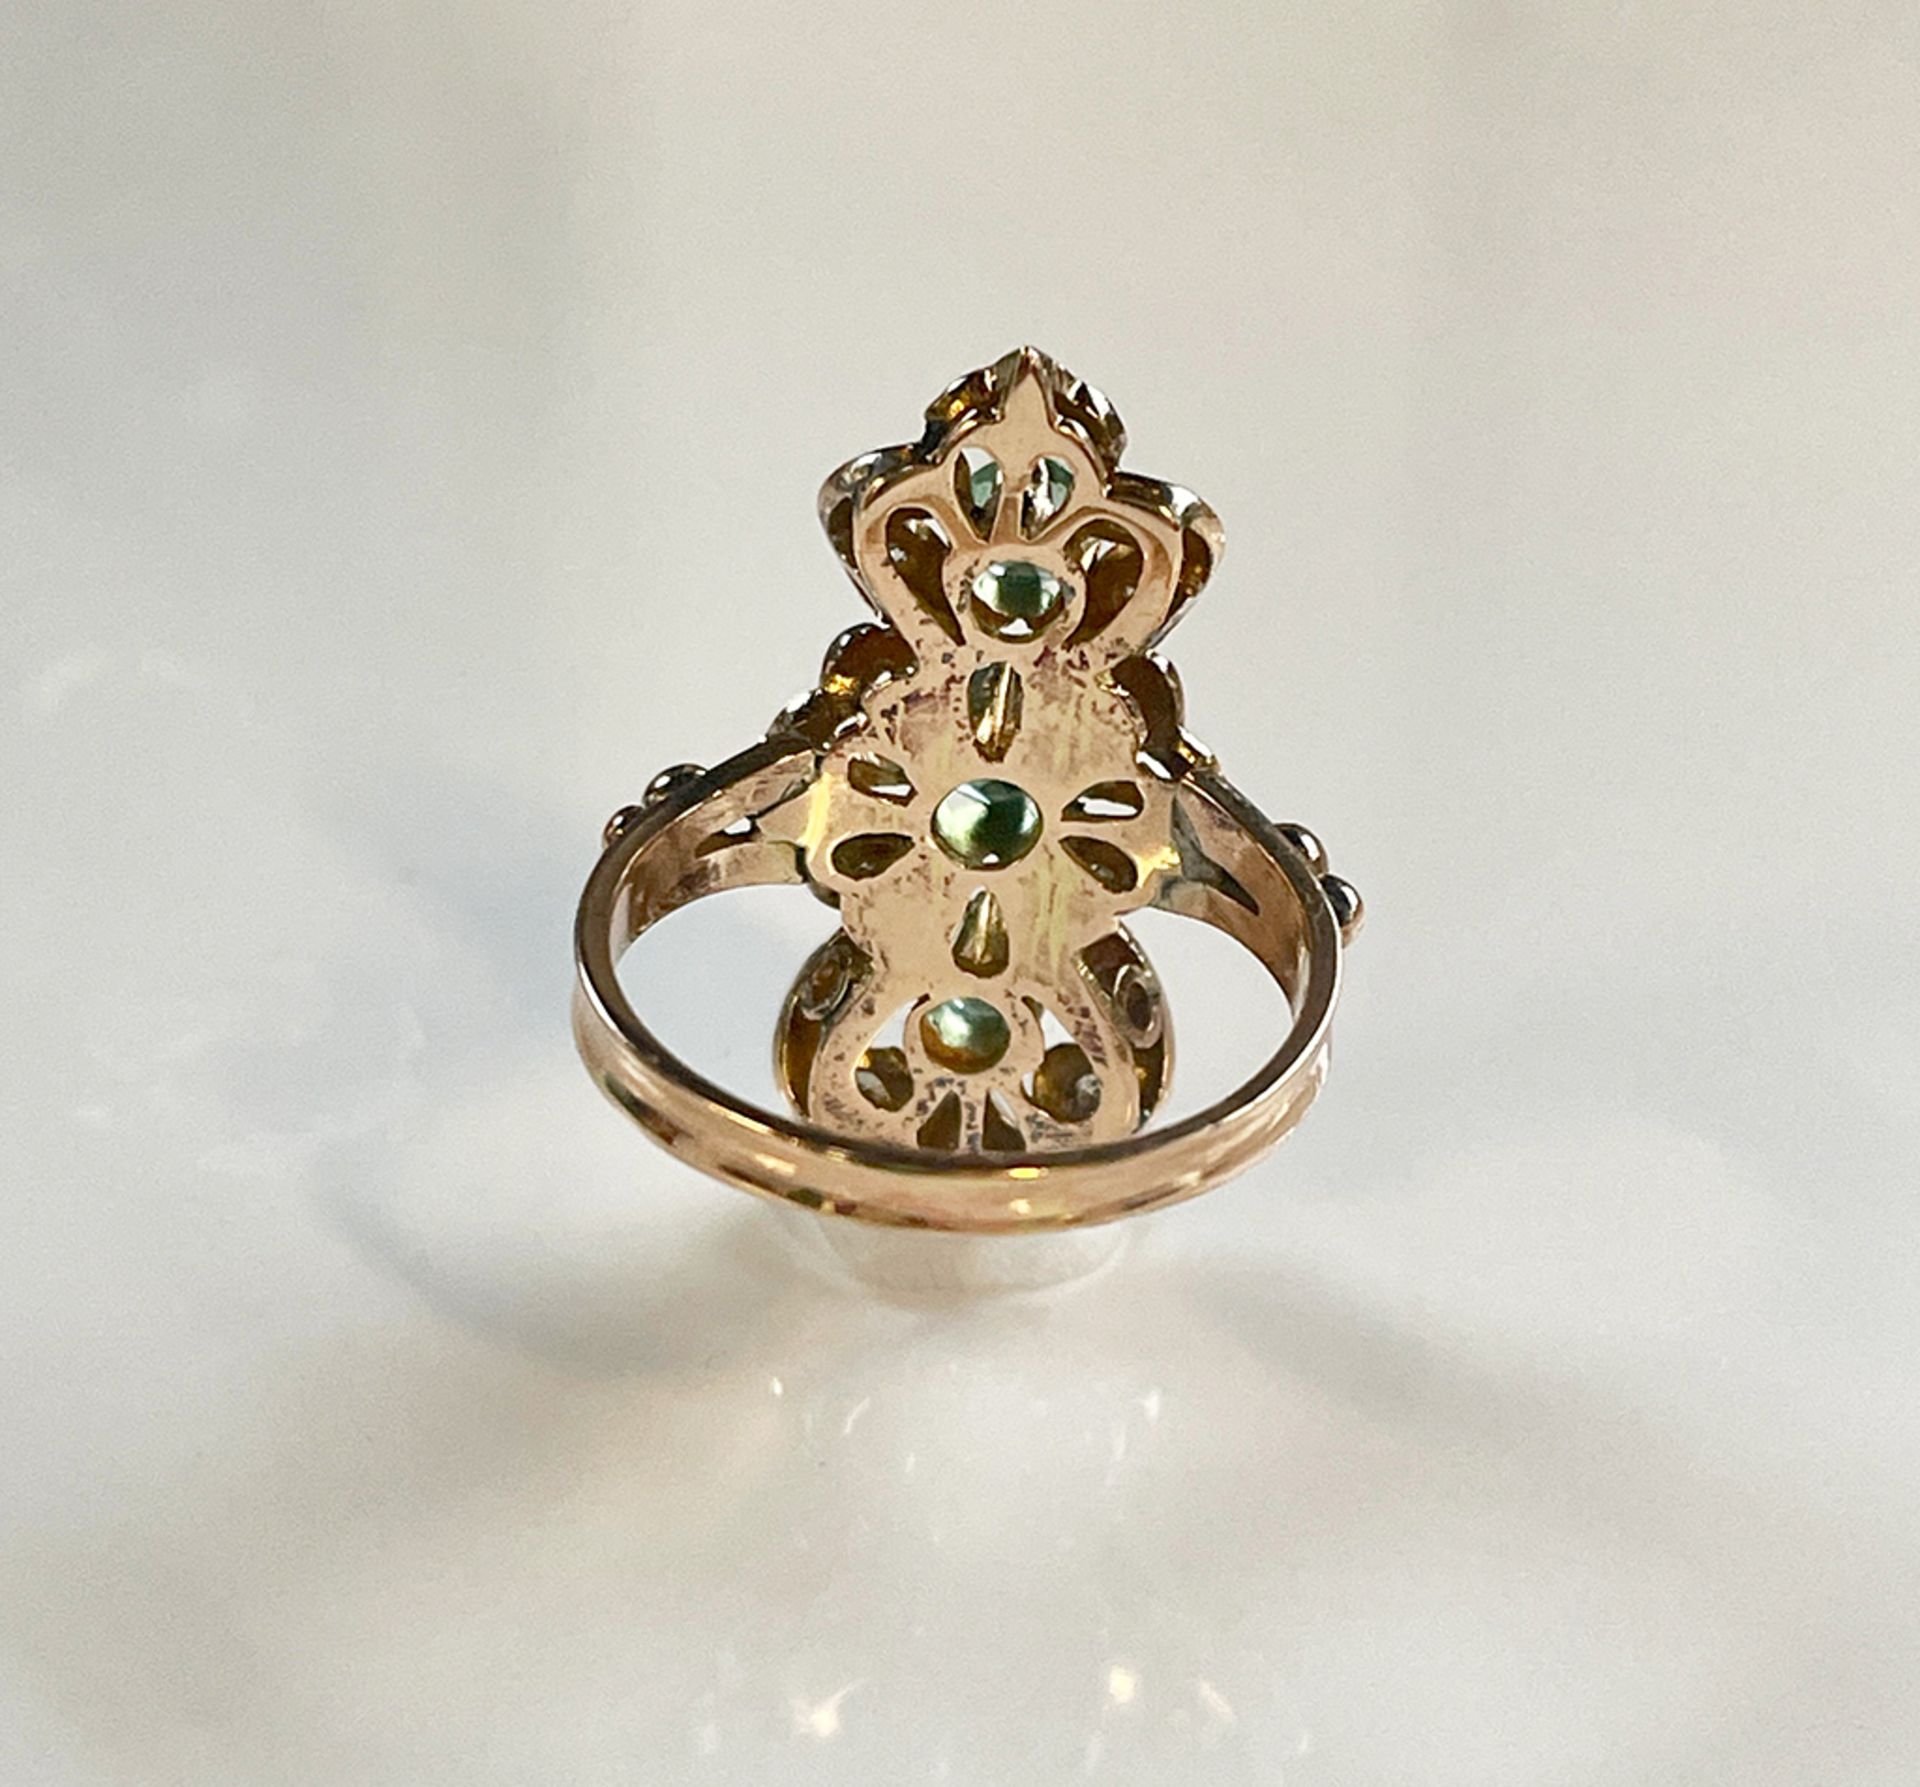 Antique Ring with diamonds and tourmaline. - Image 2 of 2